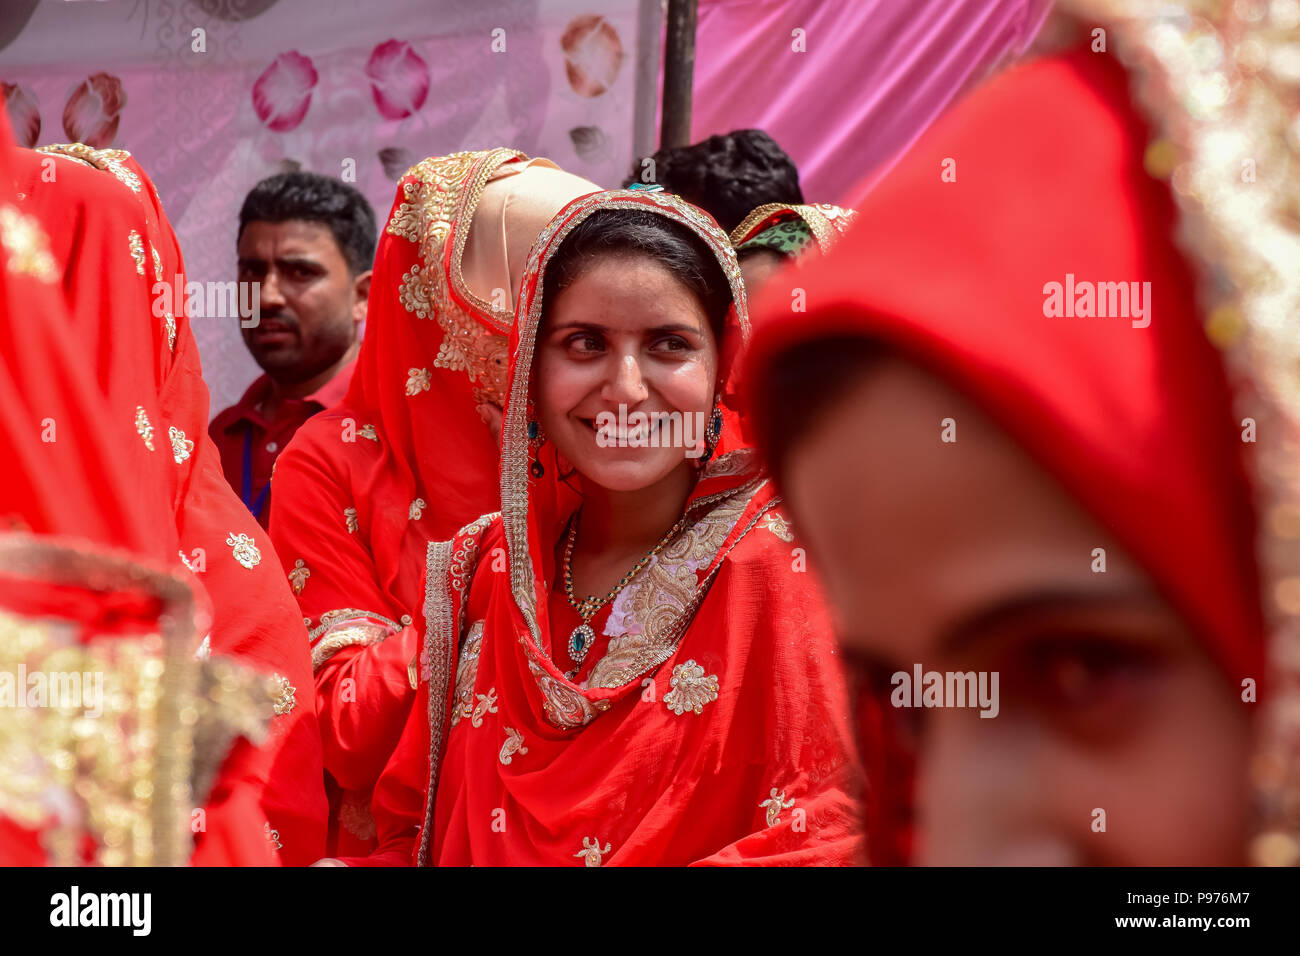 Srinagar, India. 15th July 2018. Kashmiri Muslim brides reacts during mass marriage event in Srinagar, Indian controlled Kashmir on Sunday. Mass wedding of 105 Muslim couples held in Srinagar organised by social welfare organisation primarily to help the economically backward families who cannot afford the high costs of the ceremony, dowry and expensive gifts, that still prevails in many communities of India. Credit: SOPA Images Limited/Alamy Live News Stock Photo